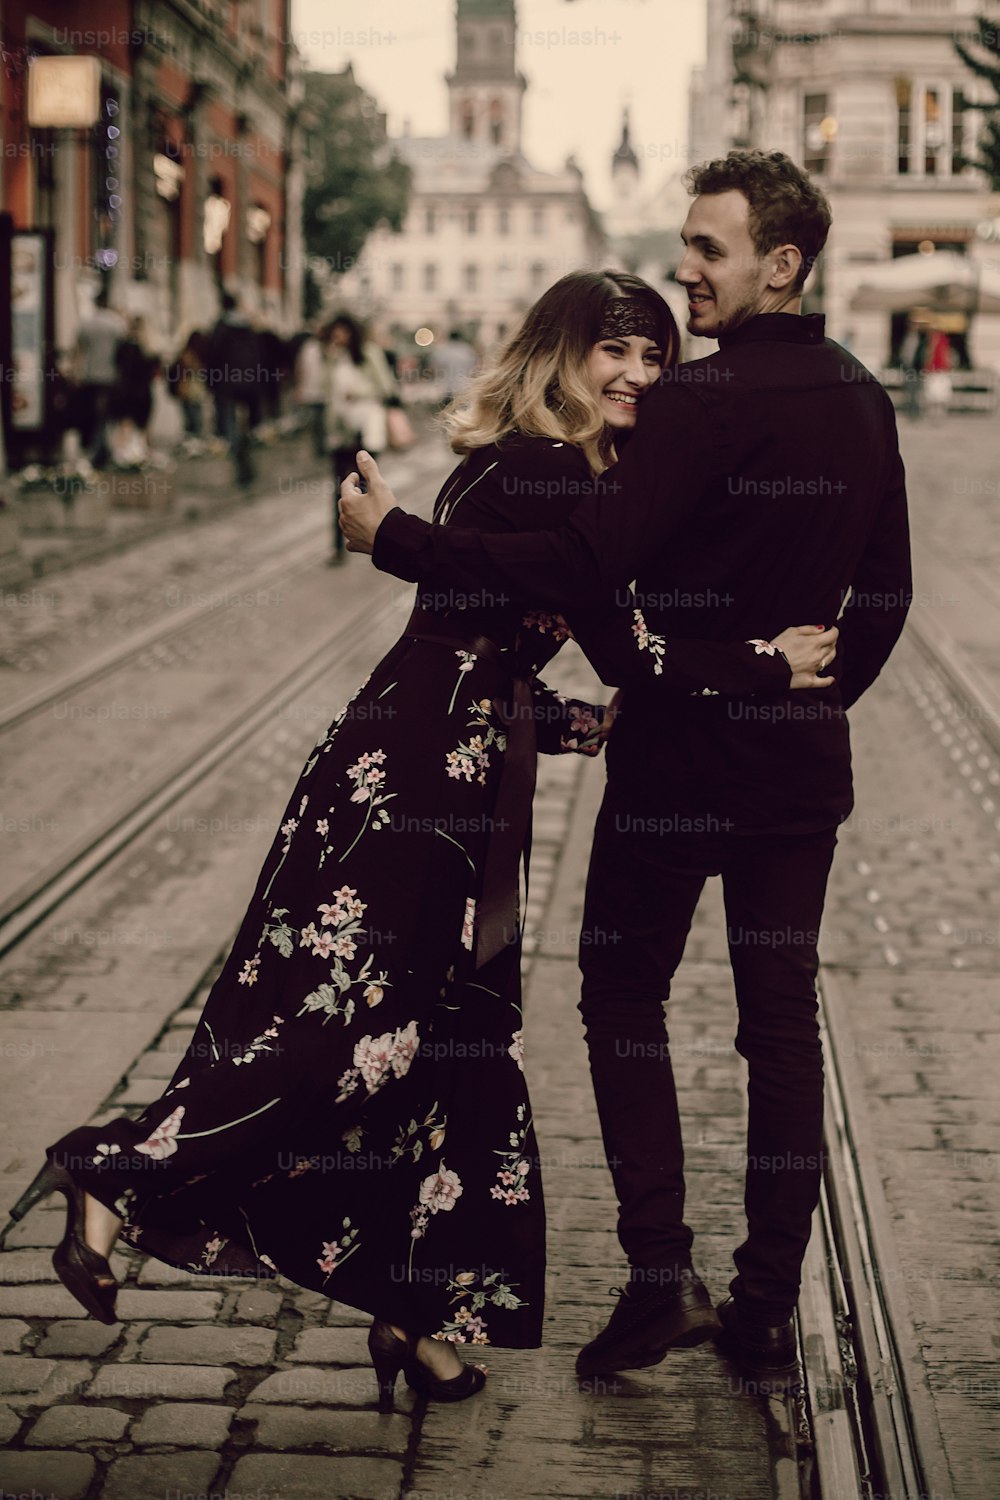 stylish gypsy couple in love walking and smiling in evening city street. woman and man gently embracing, funny romantic french atmospheric moment. love mood. back view